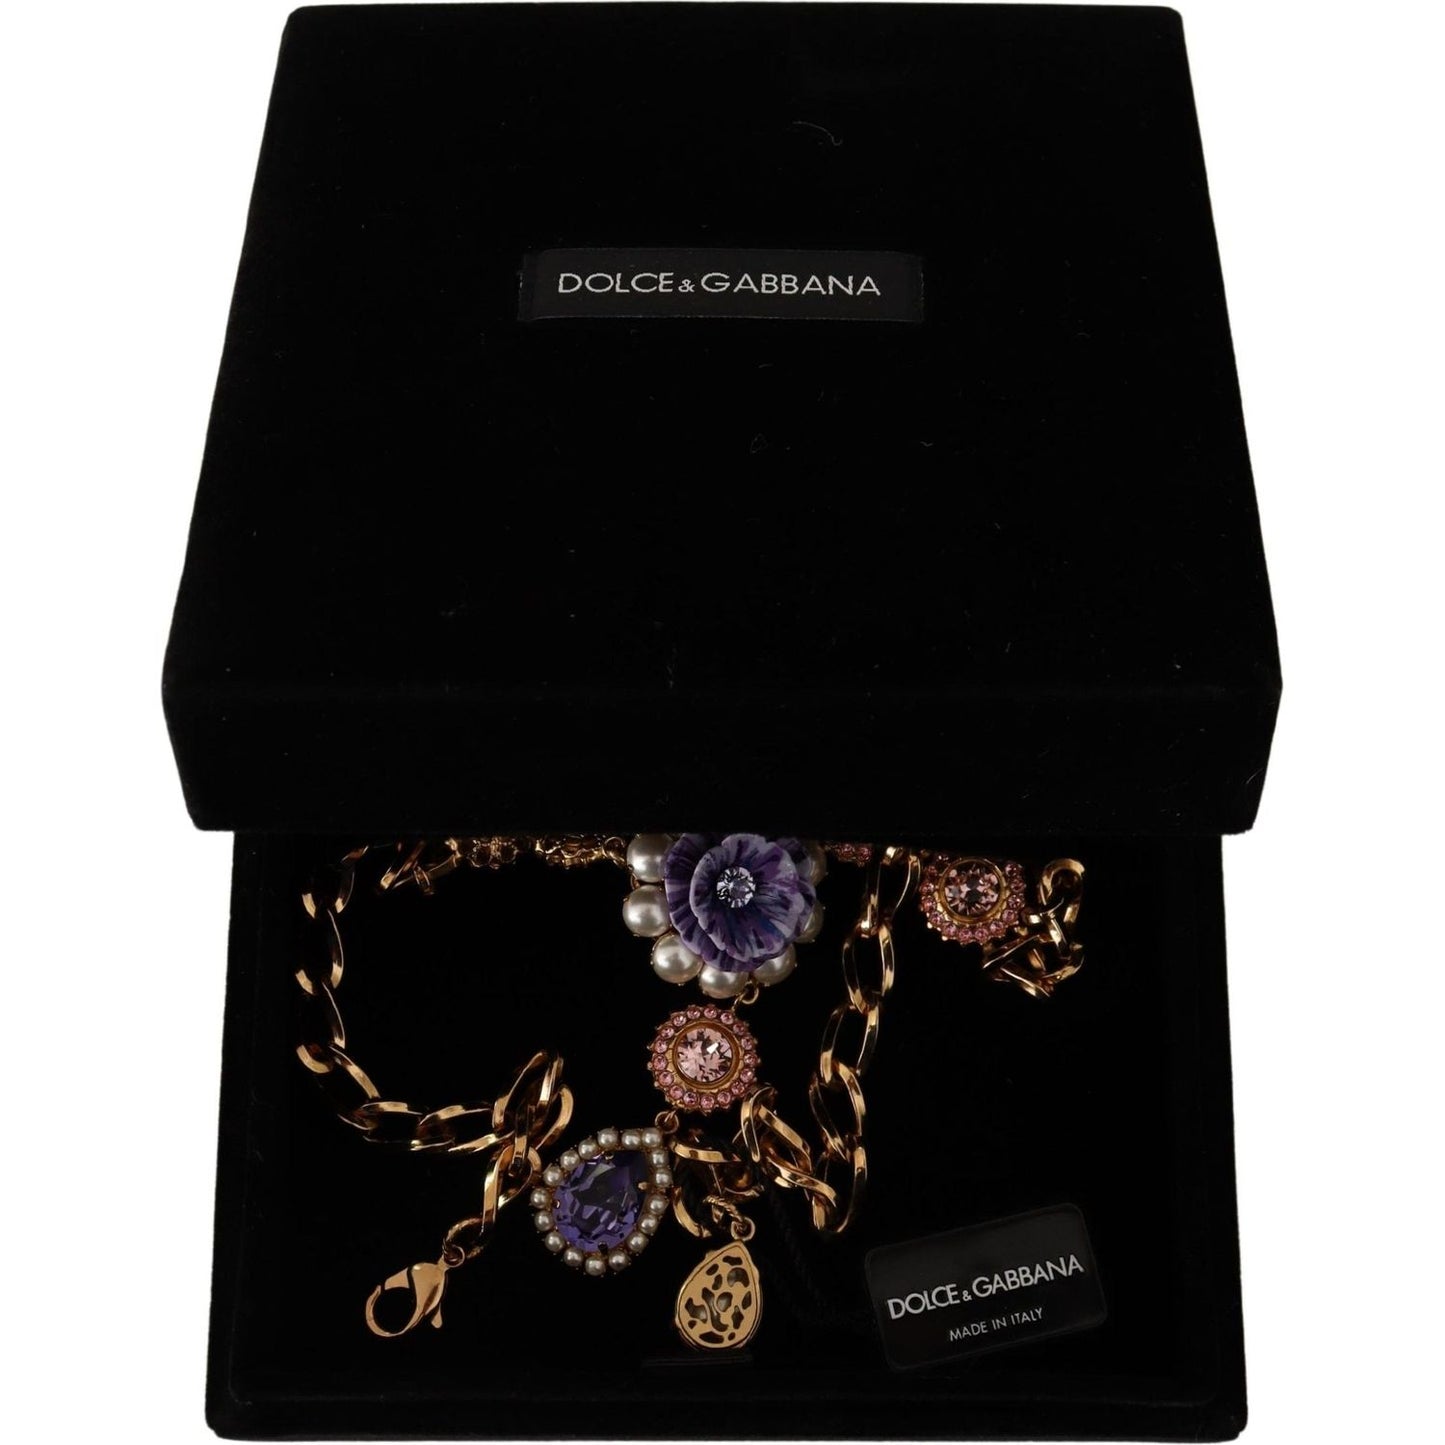 Dolce & Gabbana Elegant Floral Crystal Statement Necklace WOMAN NECKLACE gold-brass-crystal-purple-pink-pearl-pendants-necklace